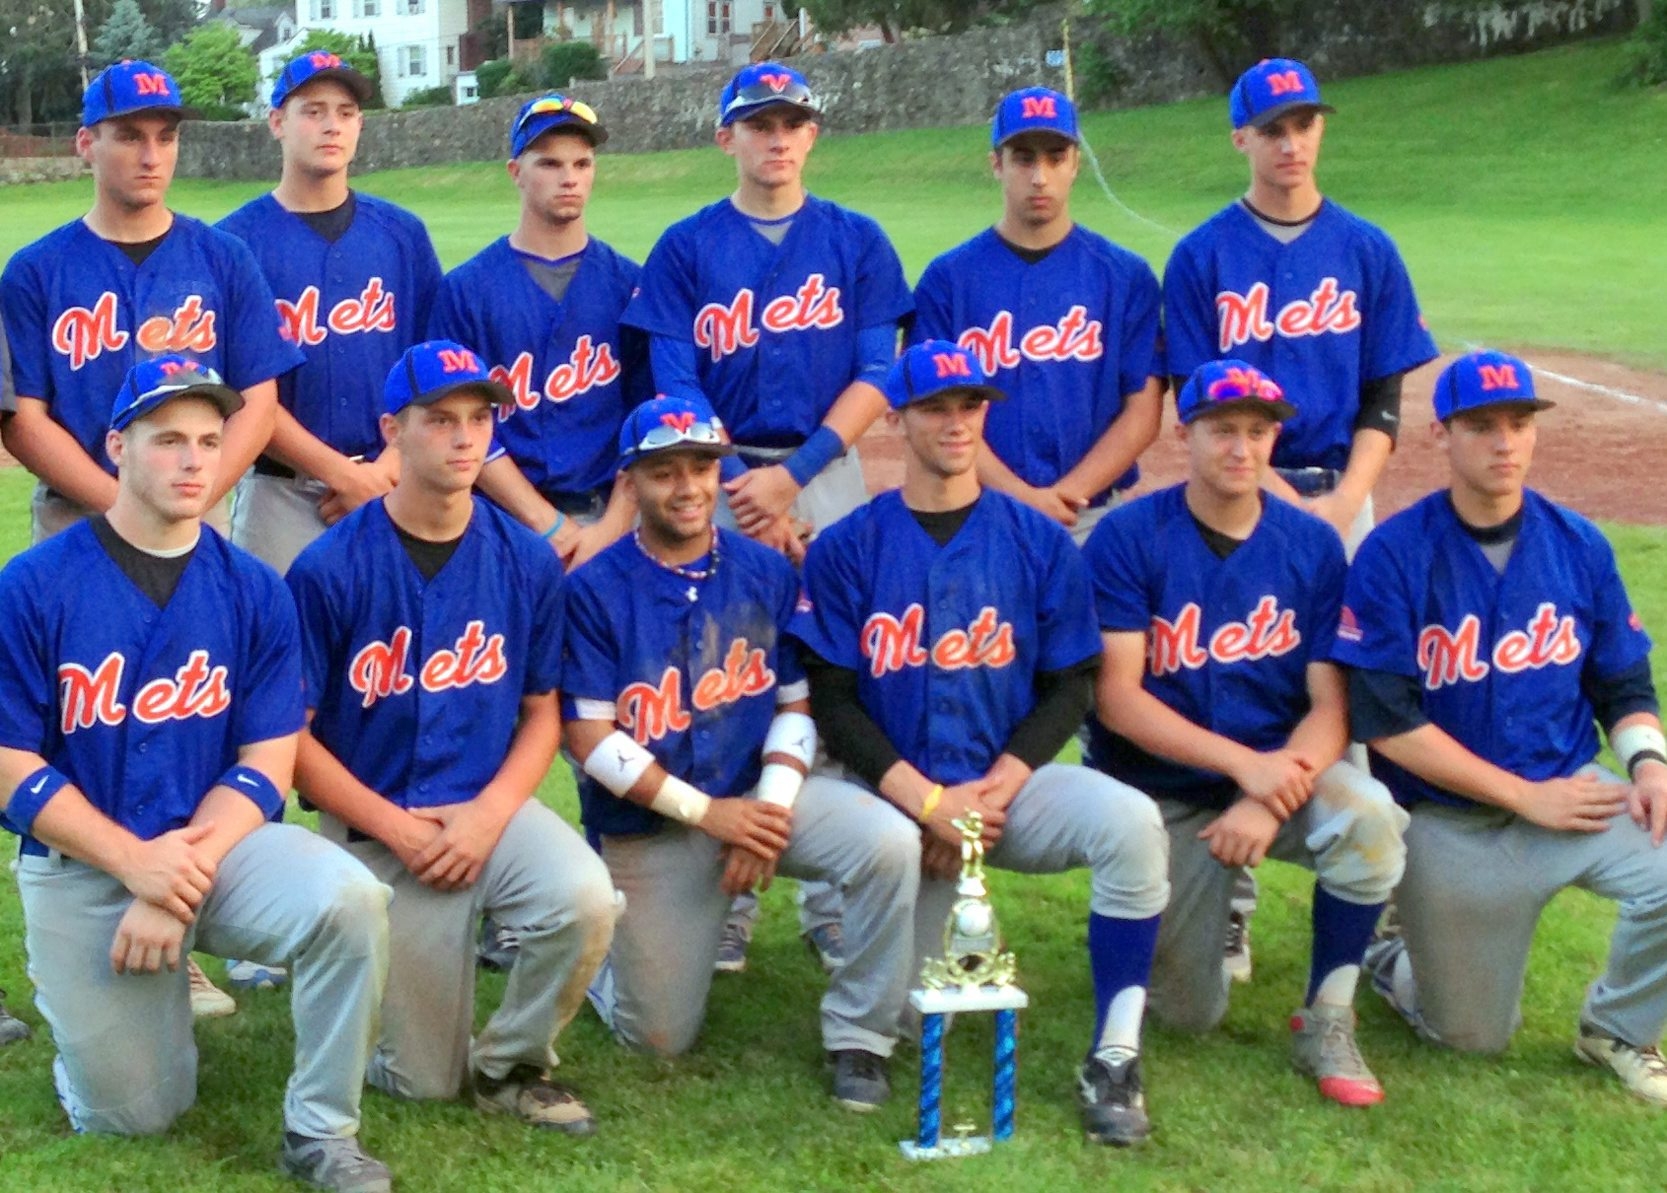 The Moosic Mets U17 baseball team won the Battle at the Border in Port